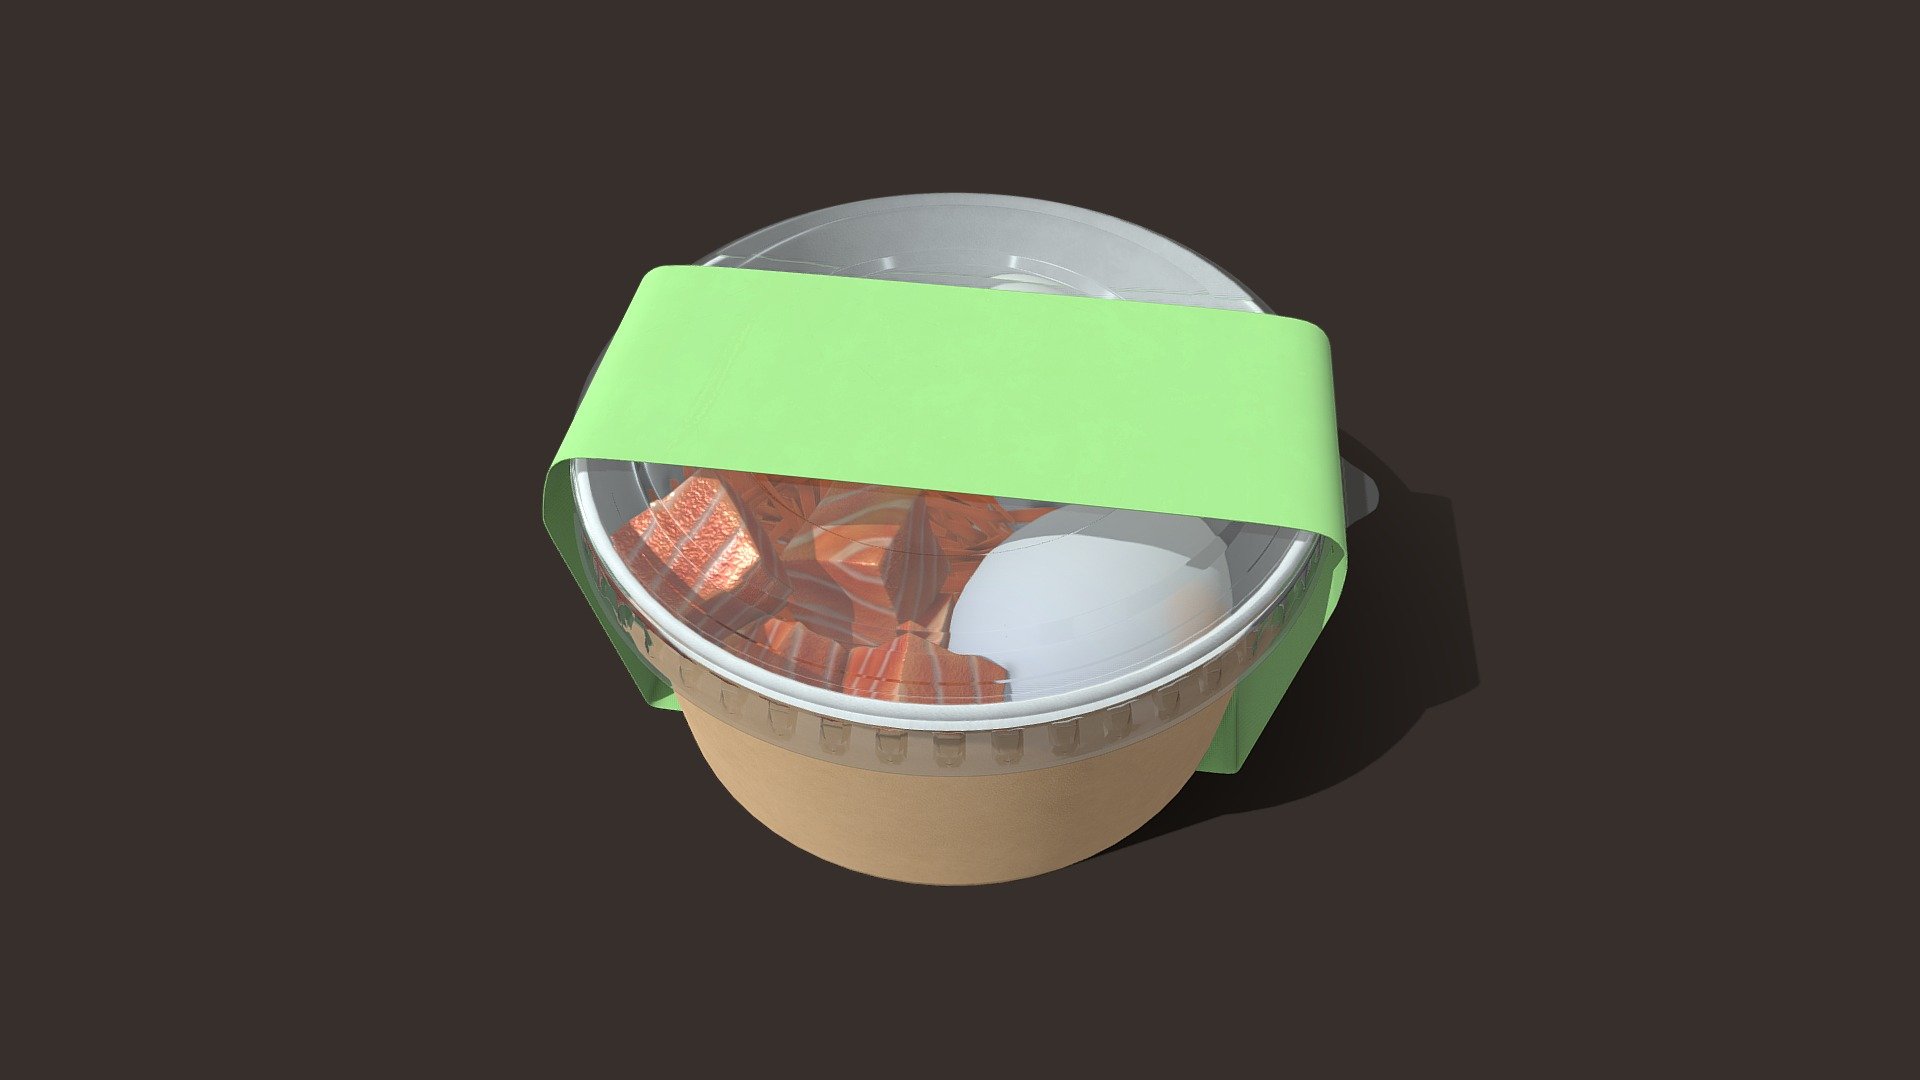 Food container is a model that will enhance detail and realism to any of your rendering projects.
​
The model has a fully textured, detailed design that allows for close-up renders, and was originally modeled in Blender 3.5, Textured in Substance Painter 2023 and rendered with Adobe Stagier
Renders have no post-processing.
​
Features:
-High-quality polygonal model, correctly scaled for an accurate representation of the original object.
-The model's resolutions are optimized for polygon efficiency.
-The model is fully textured with all materials applied.
-All textures and materials are included and mapped in every format.
-No part-name confusion when importing several models into a scene.
-No cleaning up necessary just drop your models into the scene and start rendering.
-No special plugin needed to open scene.
​
Measurements:
Units: M
​
File Formats:
OBJ
FBX
​
Textures Formats: 4k,. Ao, Col, Gloss, Heigh, Metalness, Normal, Specular, Trans - Food container - Buy Royalty Free 3D model by MDgraphicLAB 3d model